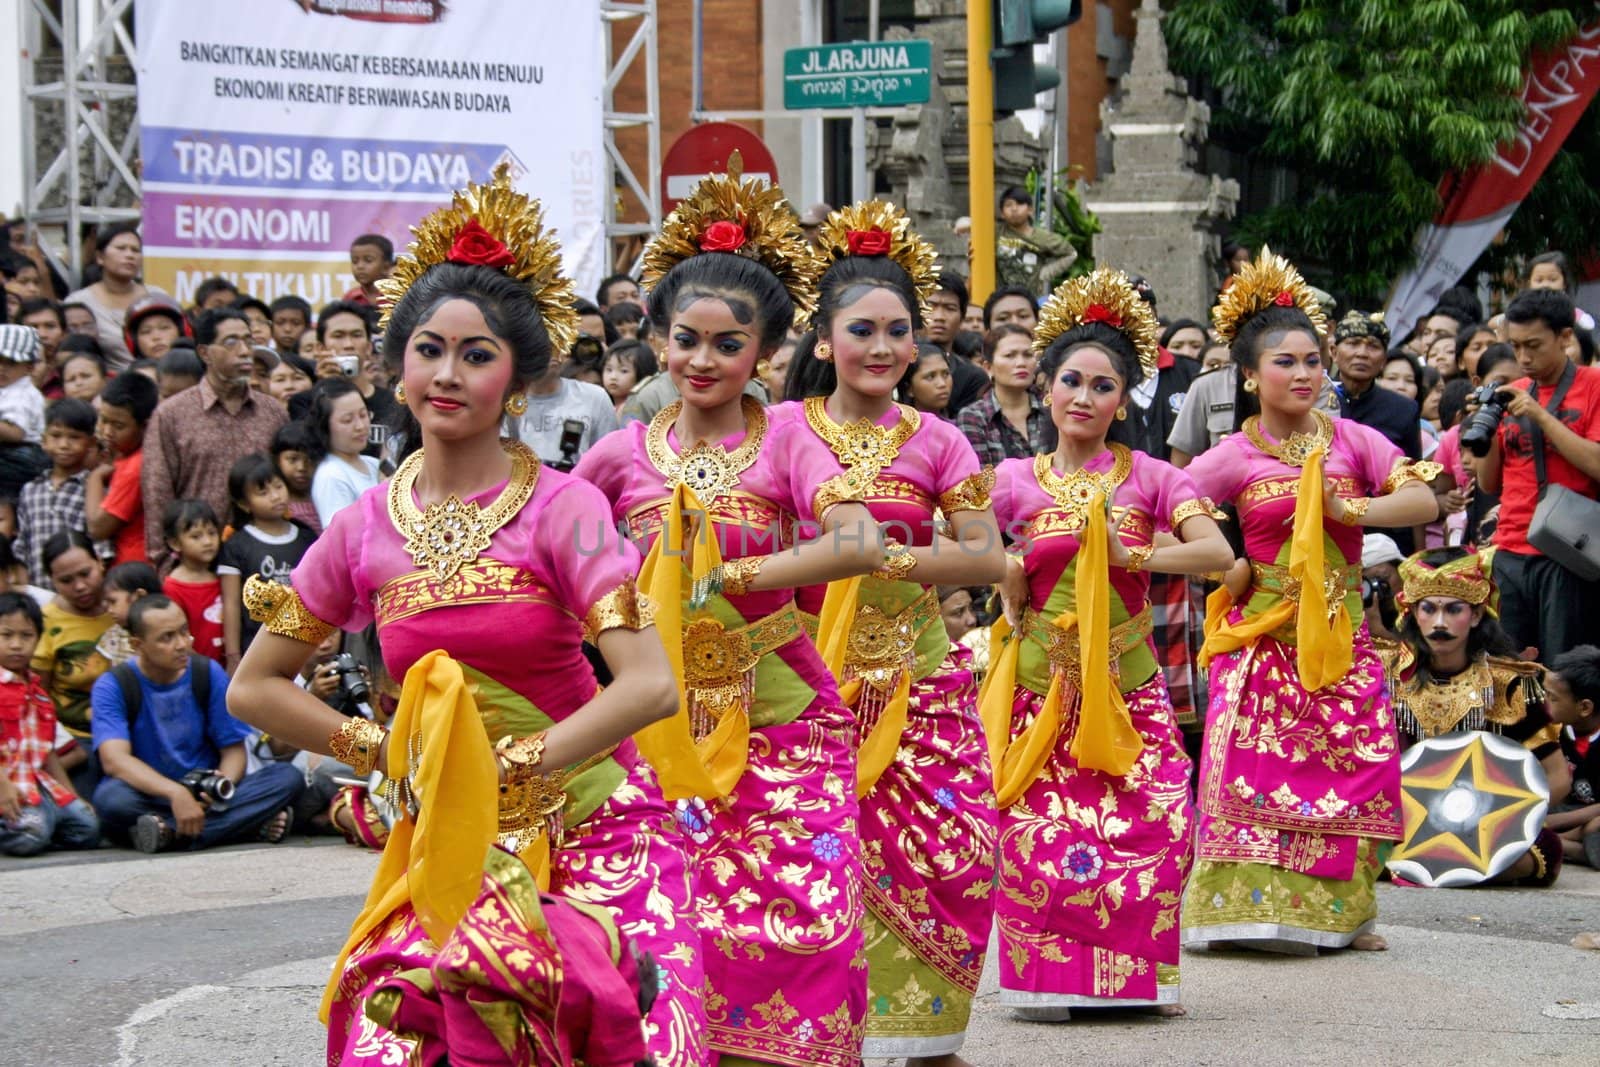 Balinese dancing performance on the street at Gajah Mada Town Festival, Bali, on December 28, 2008. It is a inspirational memories of Denpasar town,